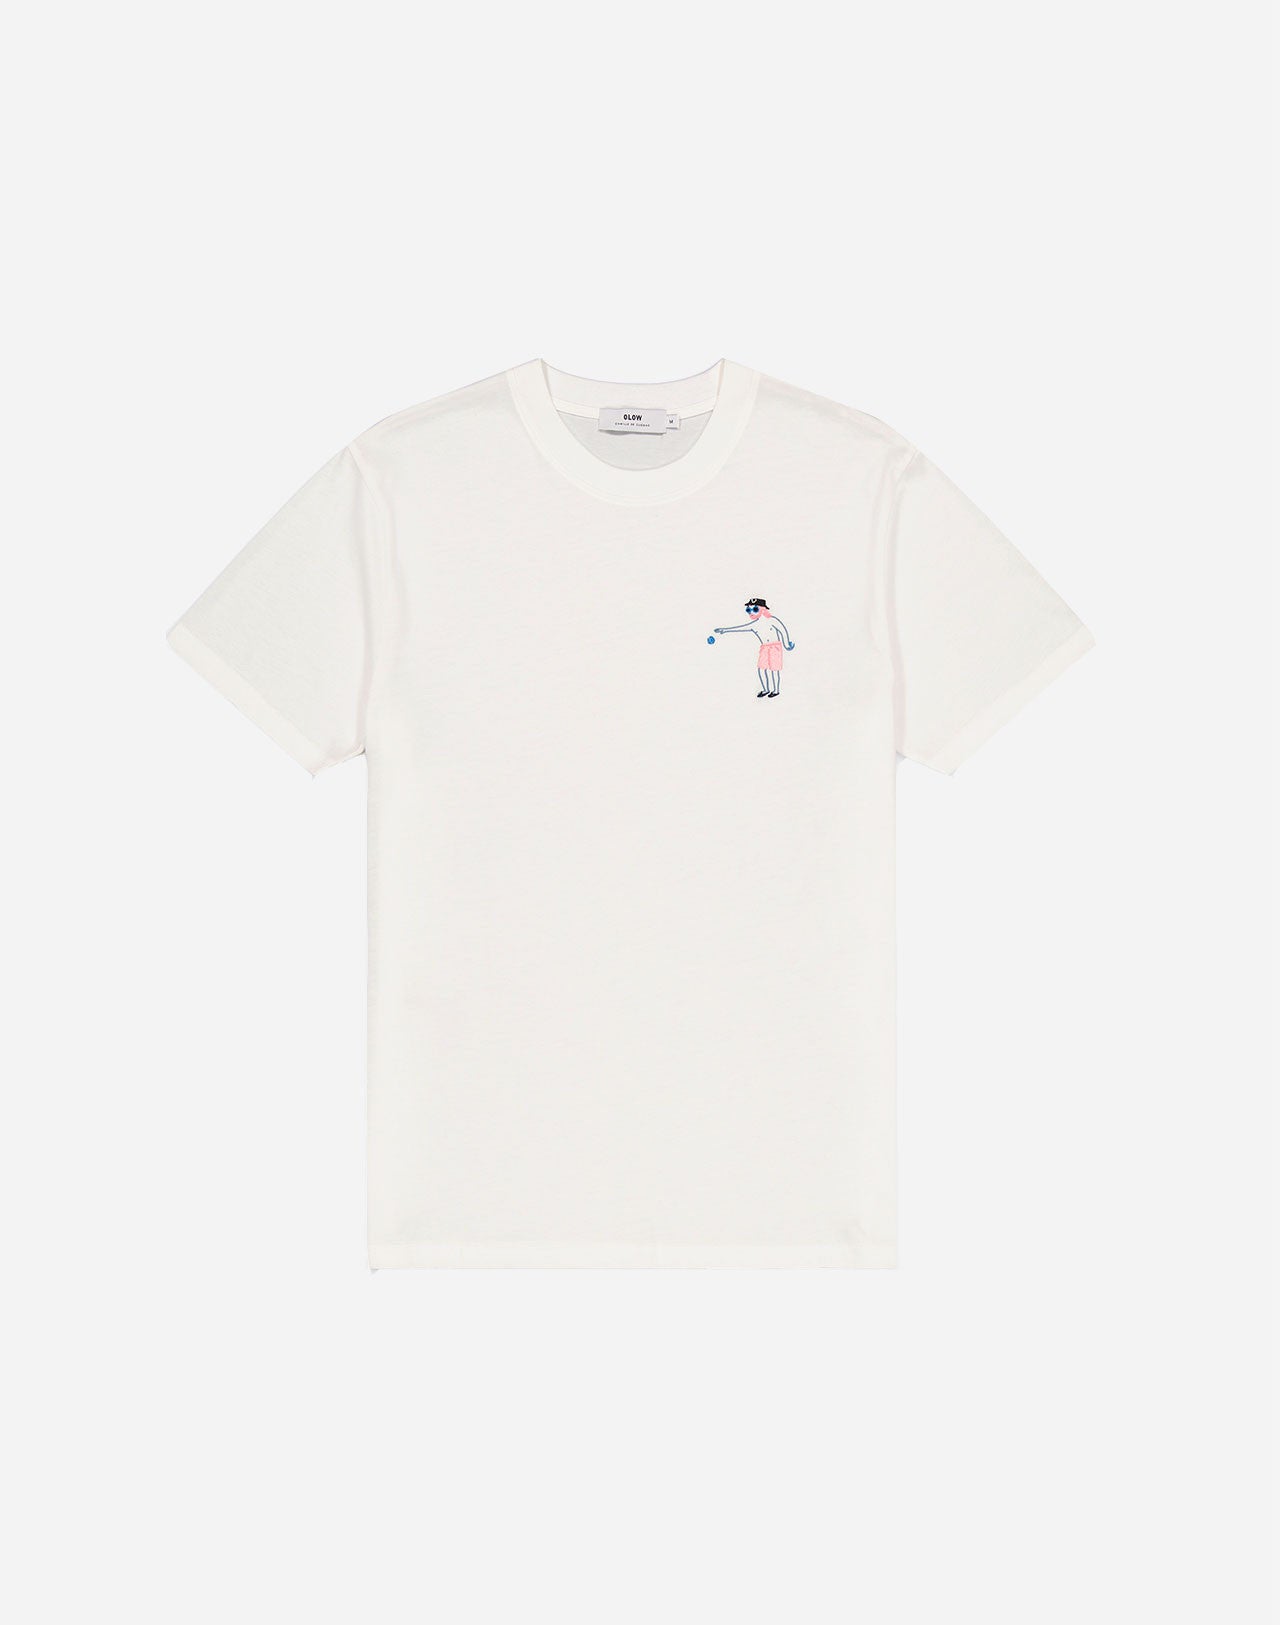 Bouliste t-shirt off white - Olow